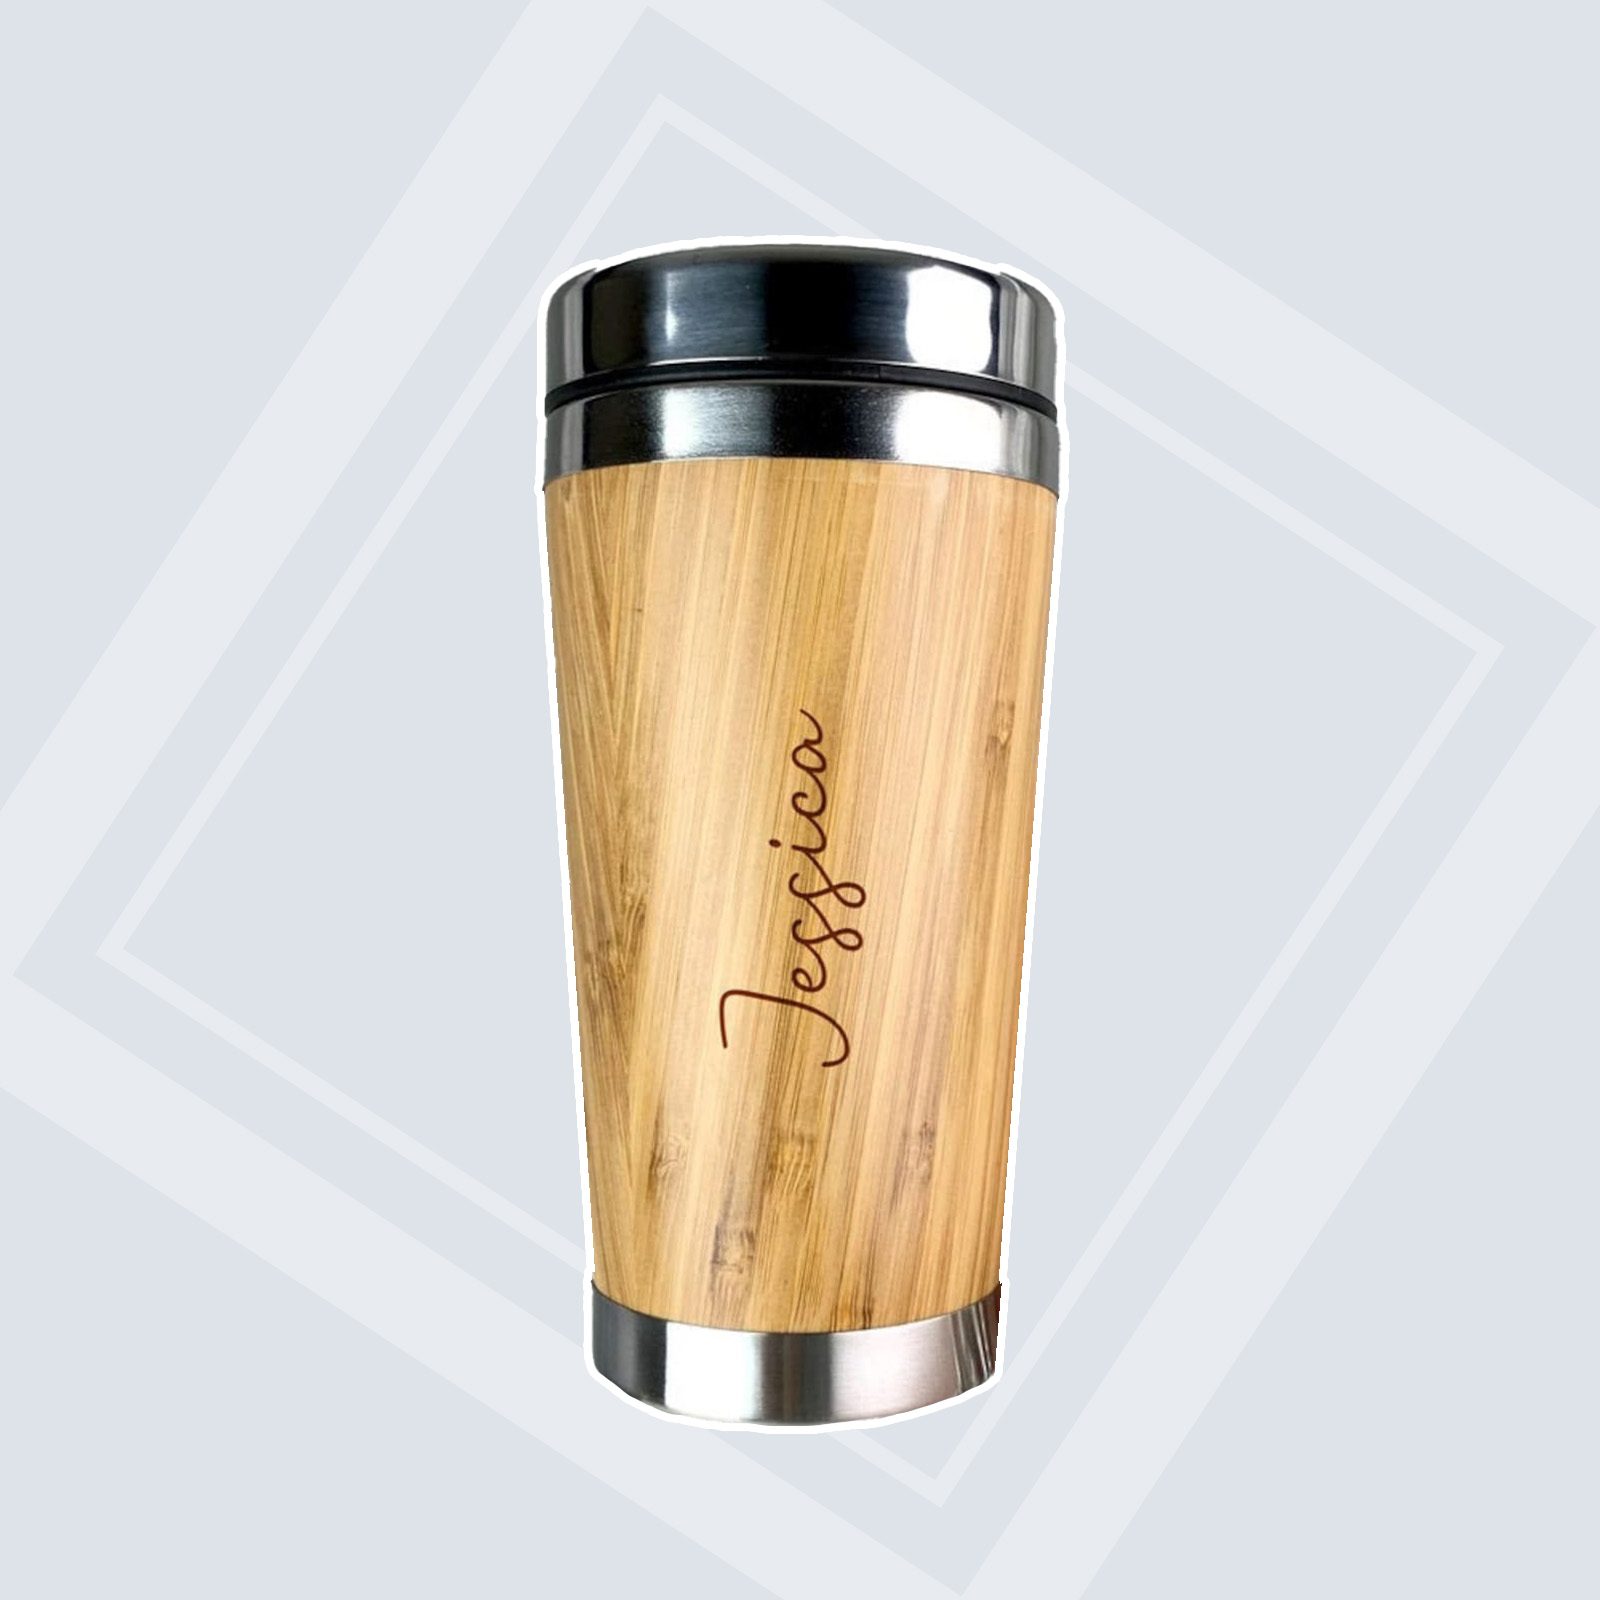 Best Coffee Thermos - The 7 Best Coffee Thermoses for 2020